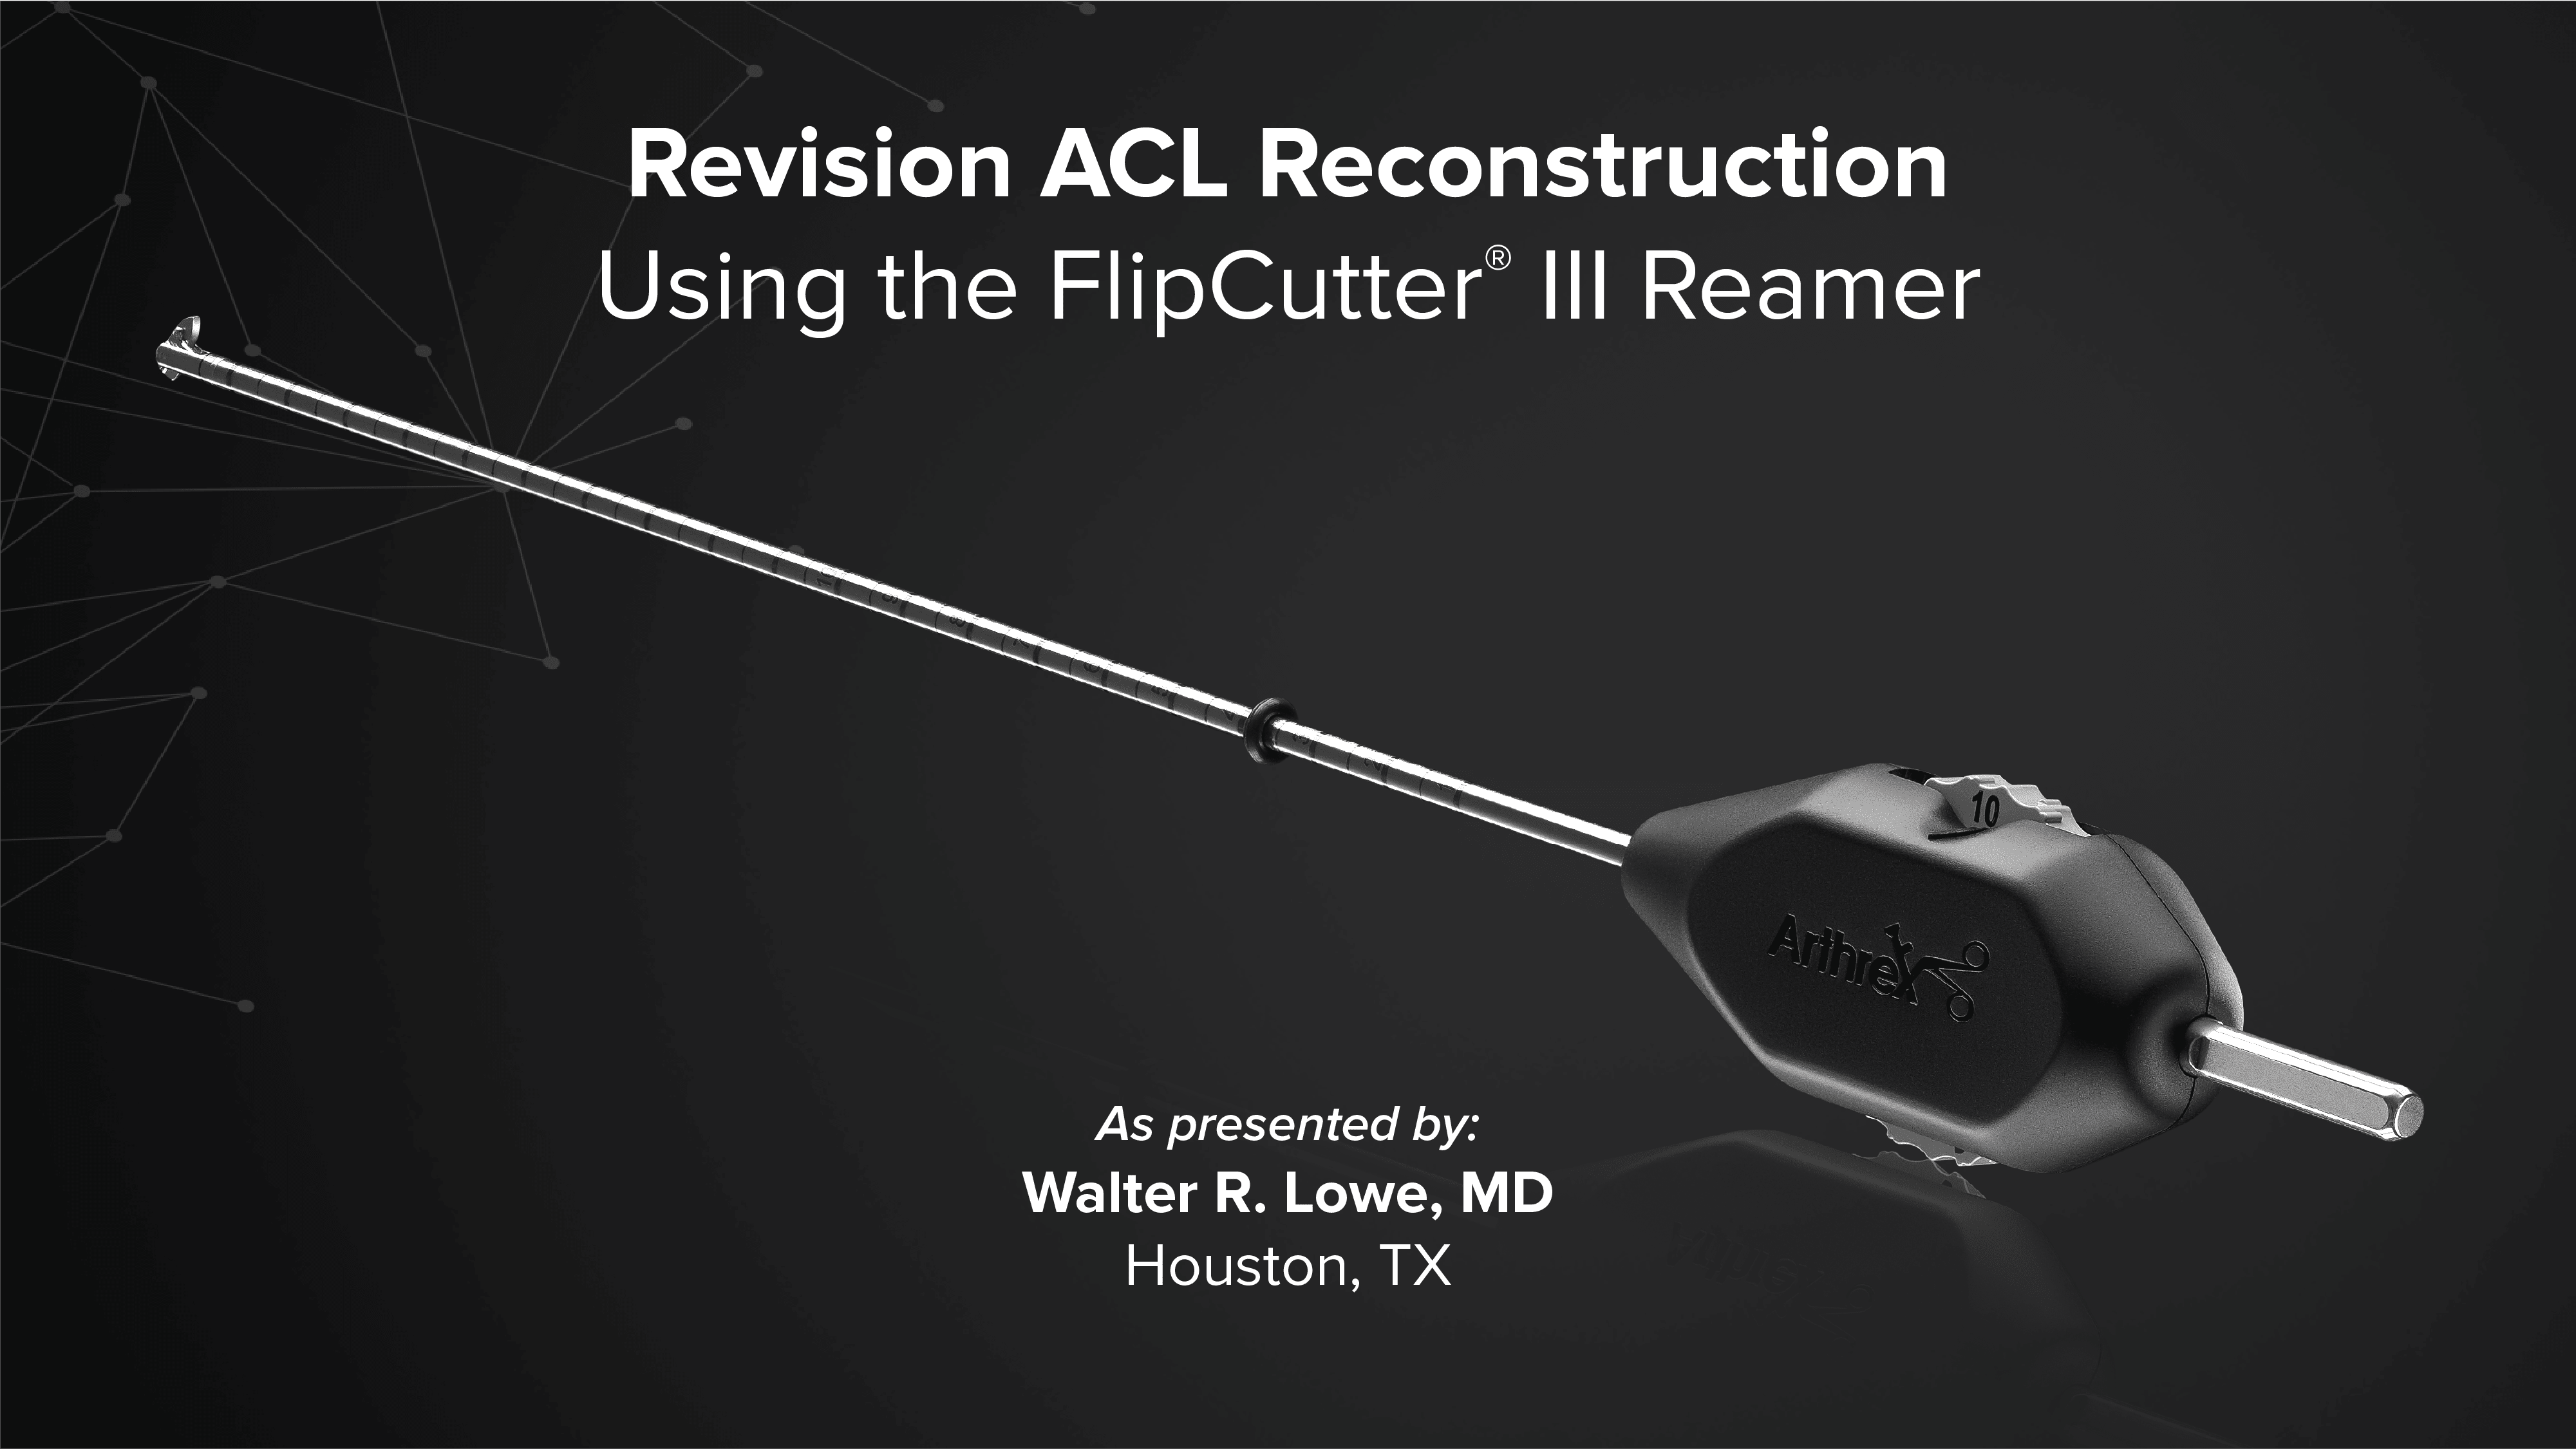 Revision ACL Reconstruction Using the FlipCutter® III Reamer